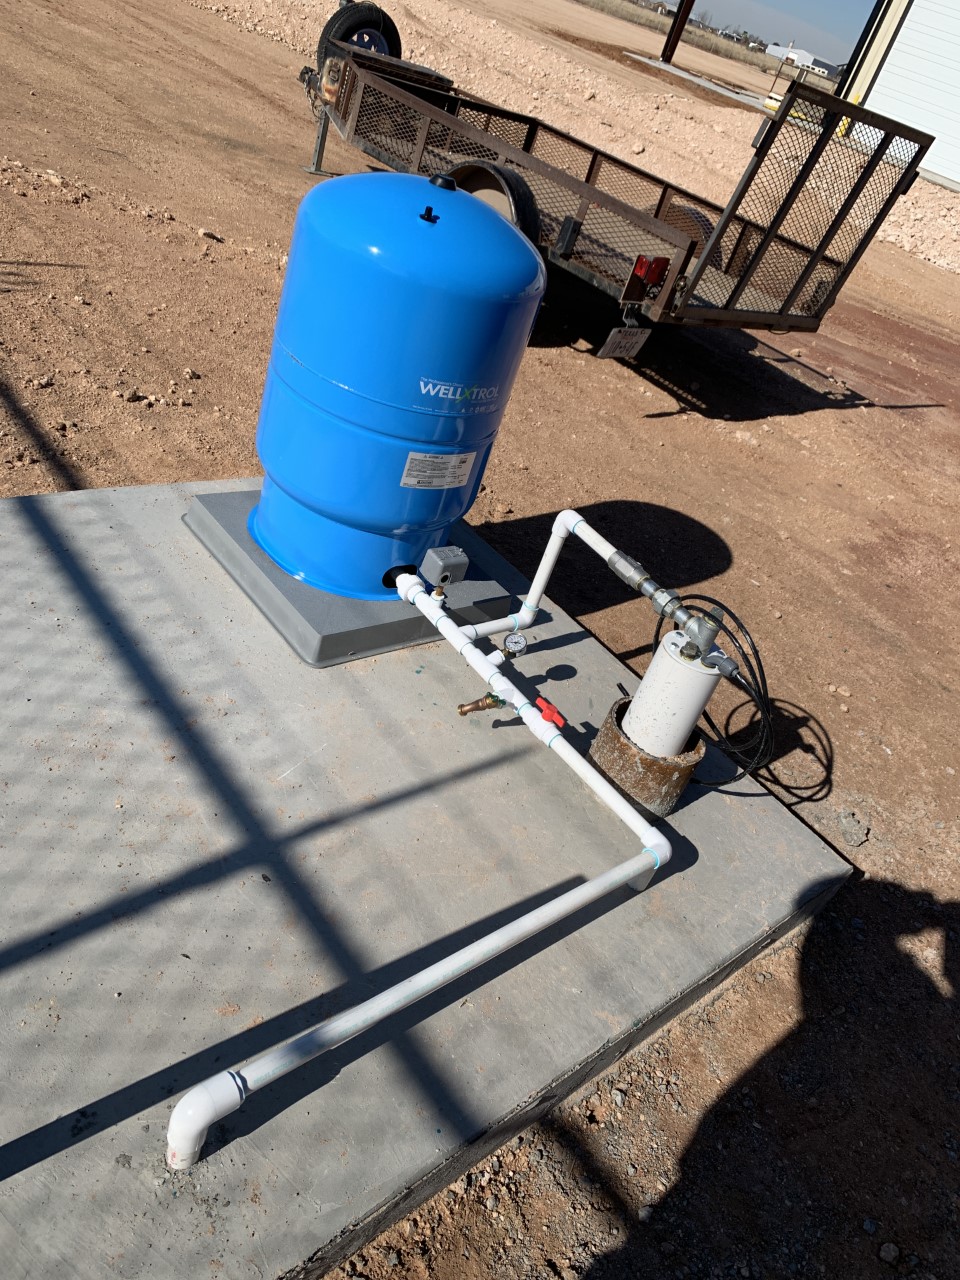 Sonwell Water Well Service 2832 Private Rd C2036, Stanton Texas 79782